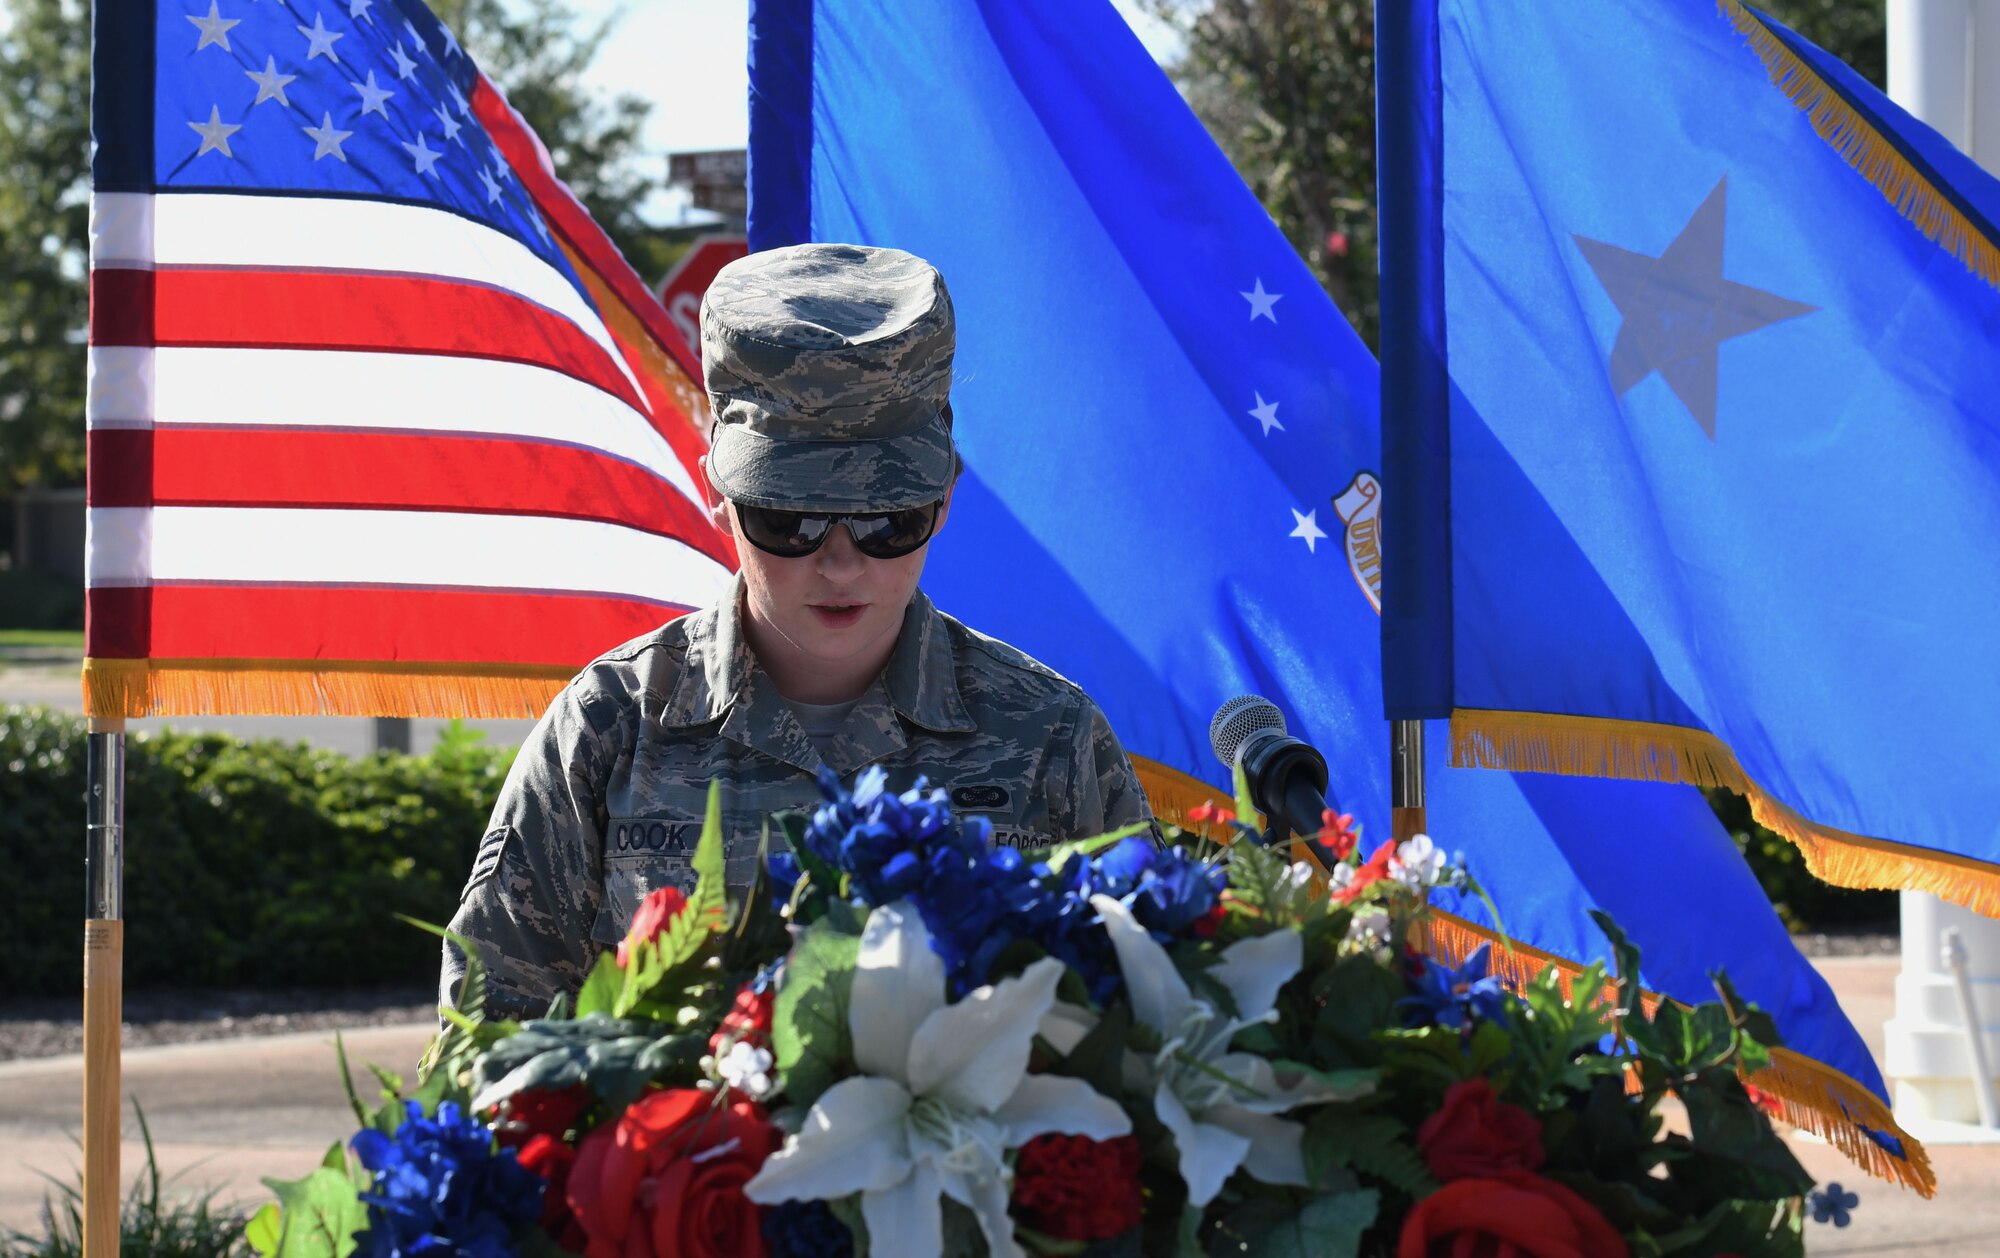 U.S. Air Force Senior Airman Holly Cook, 81st Training Wing photojournalist, delivers remarks during the POW/MIA Retreat Ceremony at Keesler Air Force Base, Mississippi, Sept. 20, 2018. The event was held to raise awareness and to pay tribute to all prisoners of war and those military members still missing in action. (U.S. Air Force photo by Kemberly Groue)